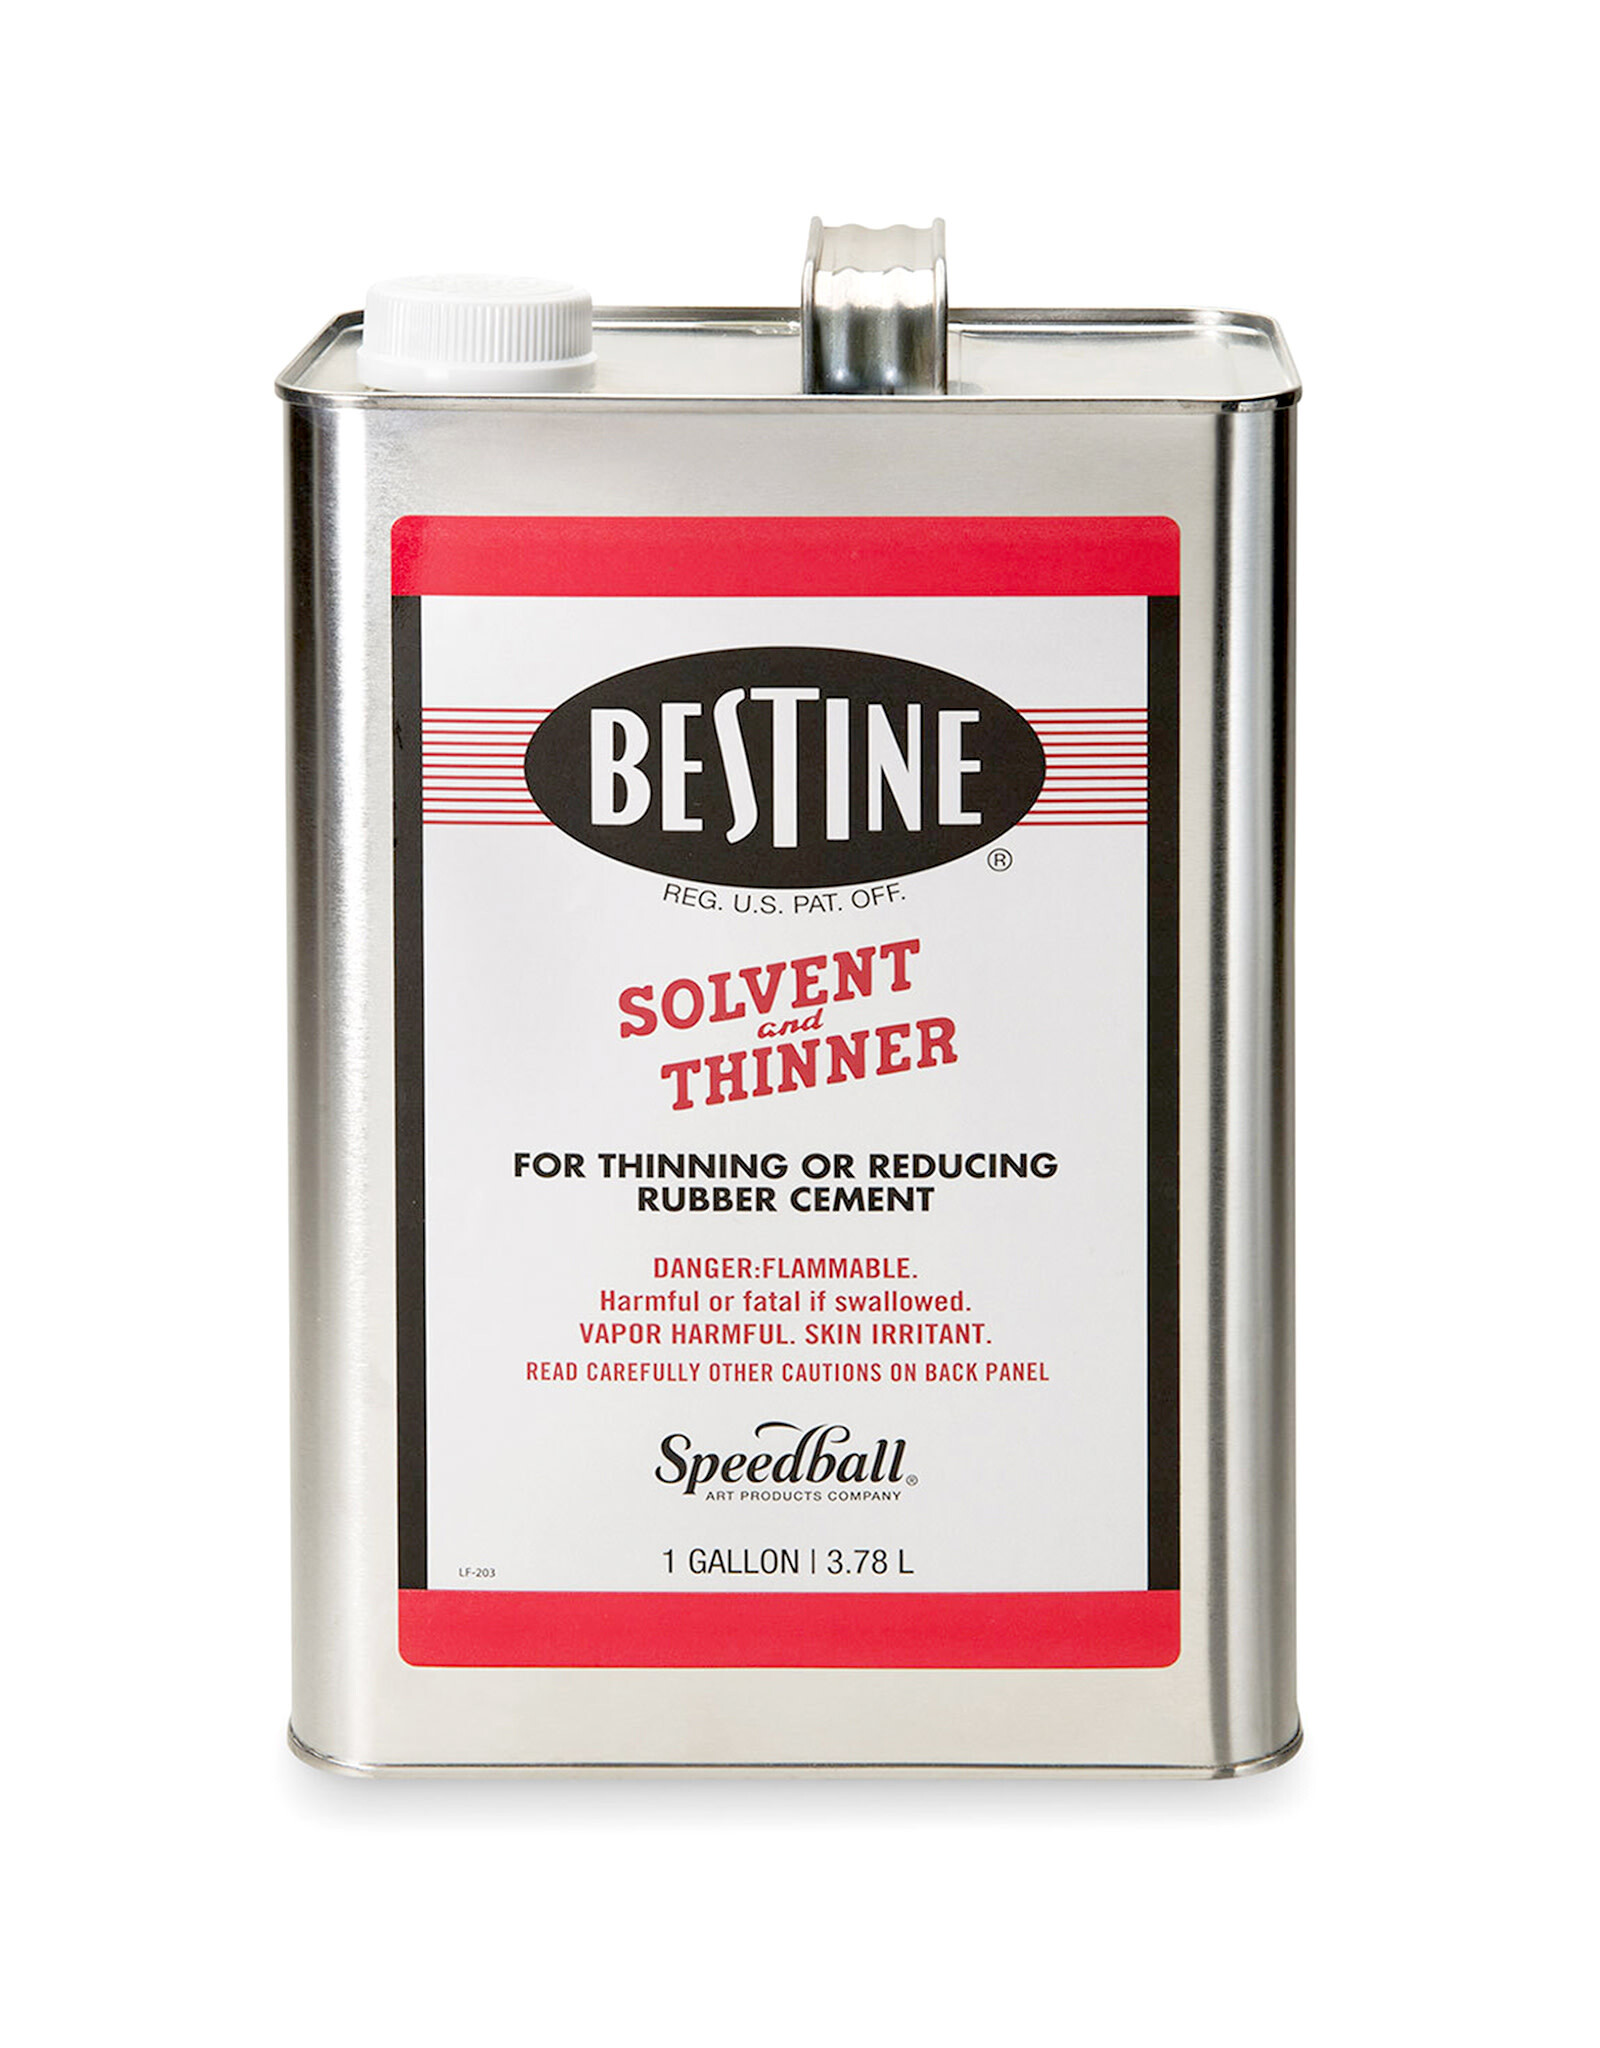 SPEEDBALL ART PRODUCTS Best-Test Bestine Solvent and Thinner, 1 gal